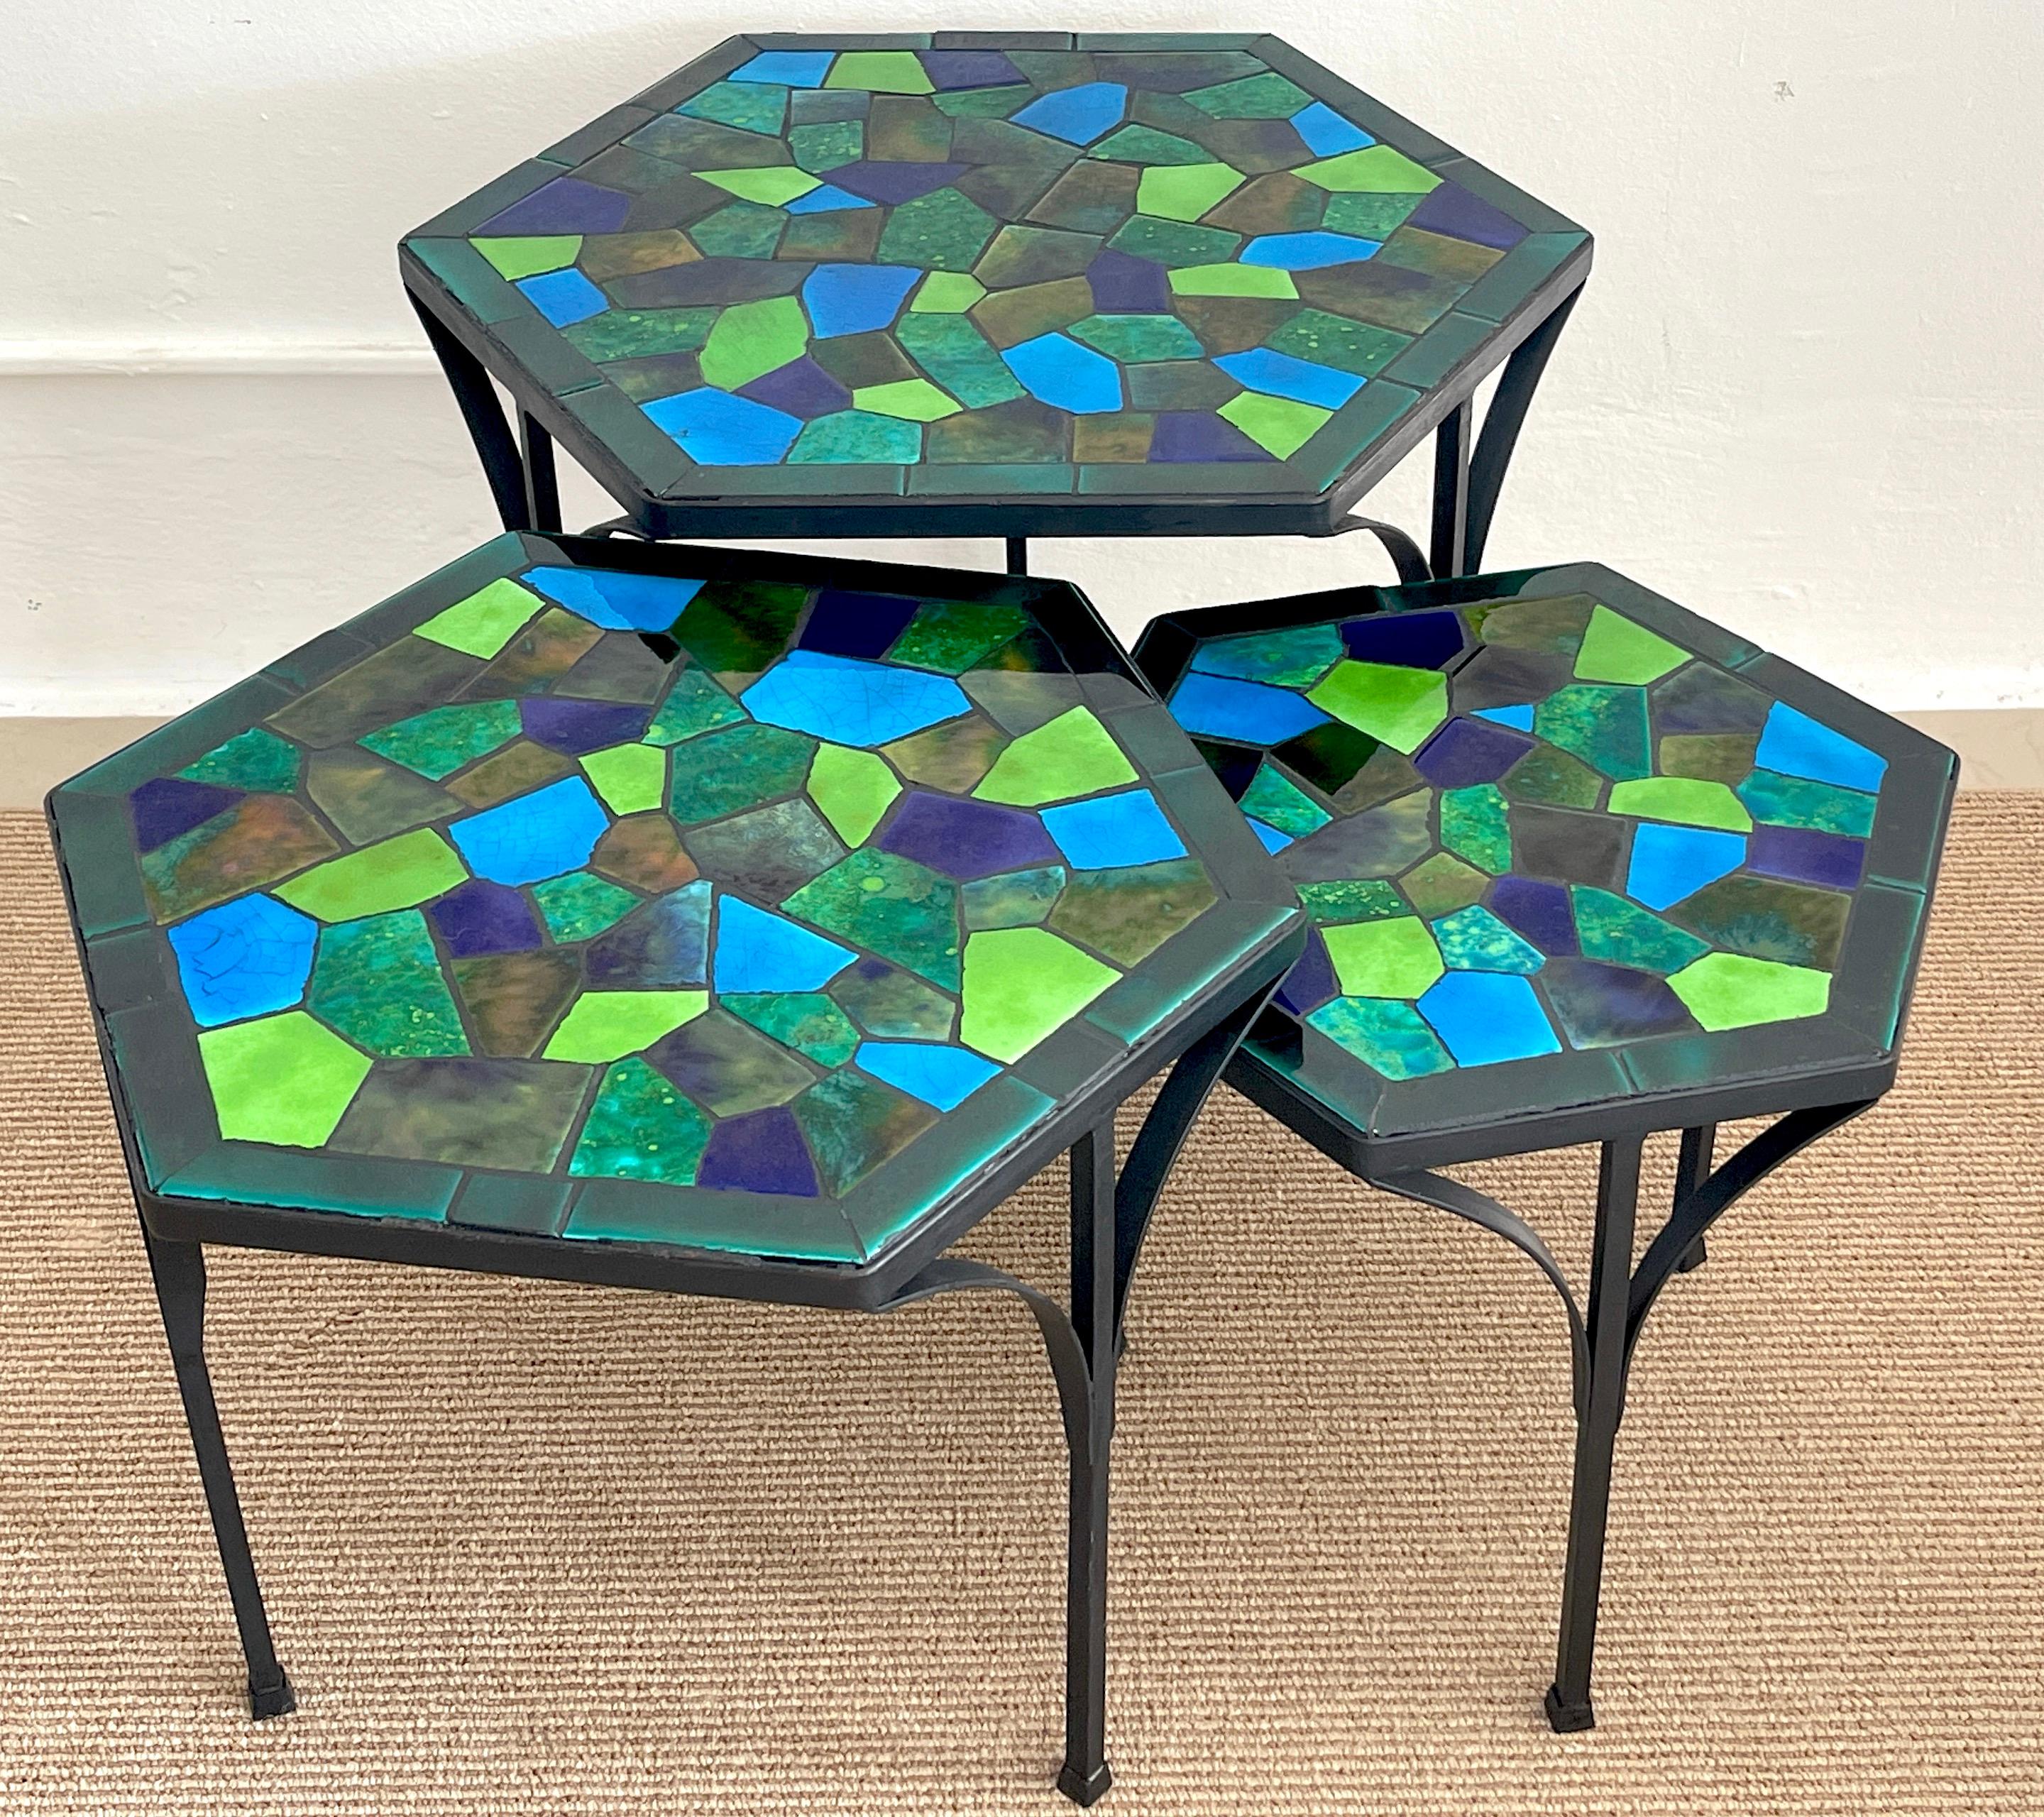 Three graduating wrought iron & ceramic mosaic tables by Jon Matin
Set of three hexagonal graduating tables, stunning blue and green color palette. Can use individually or group/ line up for a coffee table. 

Largest table 21